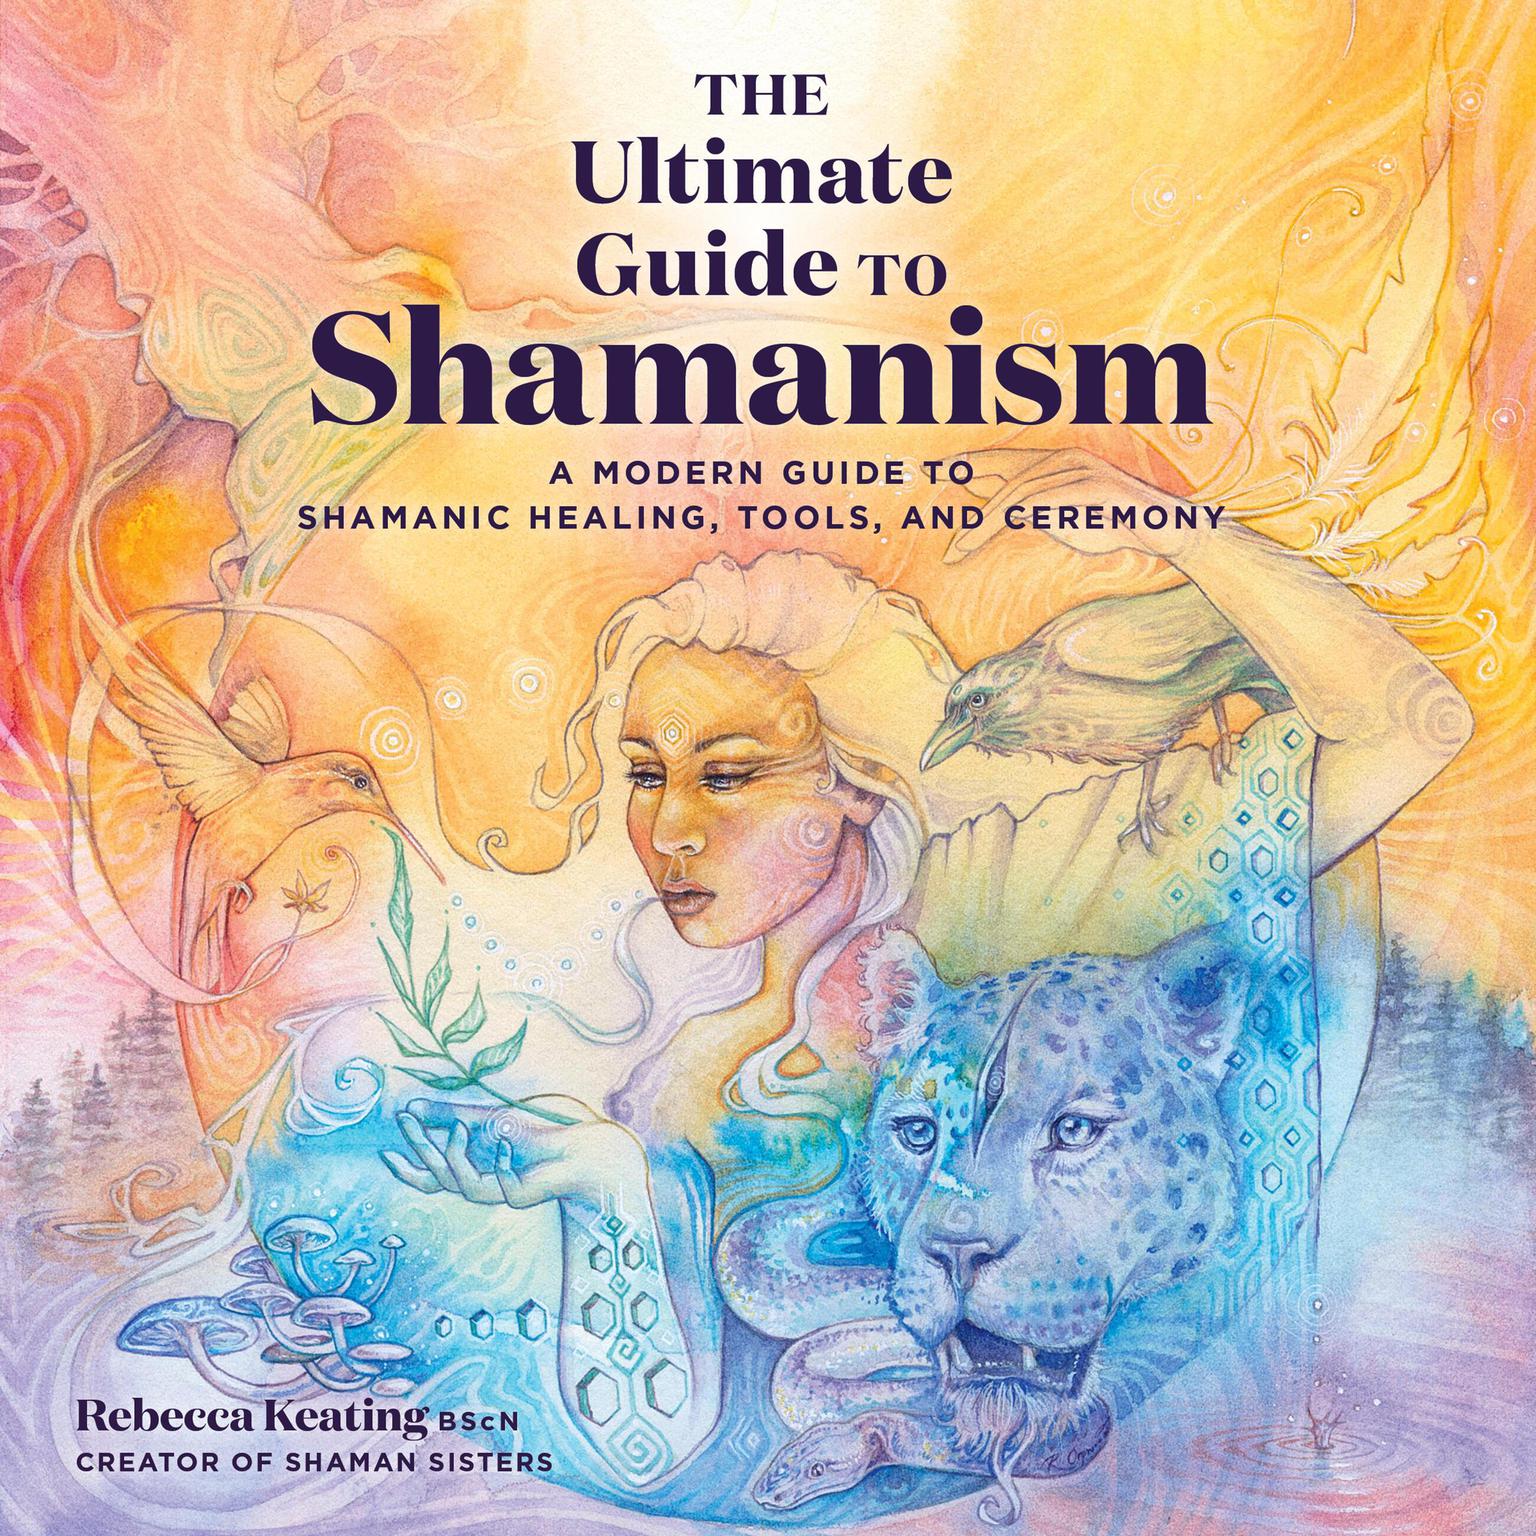 The Ultimate Guide to Shamanism: A Modern Guide to Shamanic Healing, Tools, and Ceremony Audiobook, by Rebecca Keating